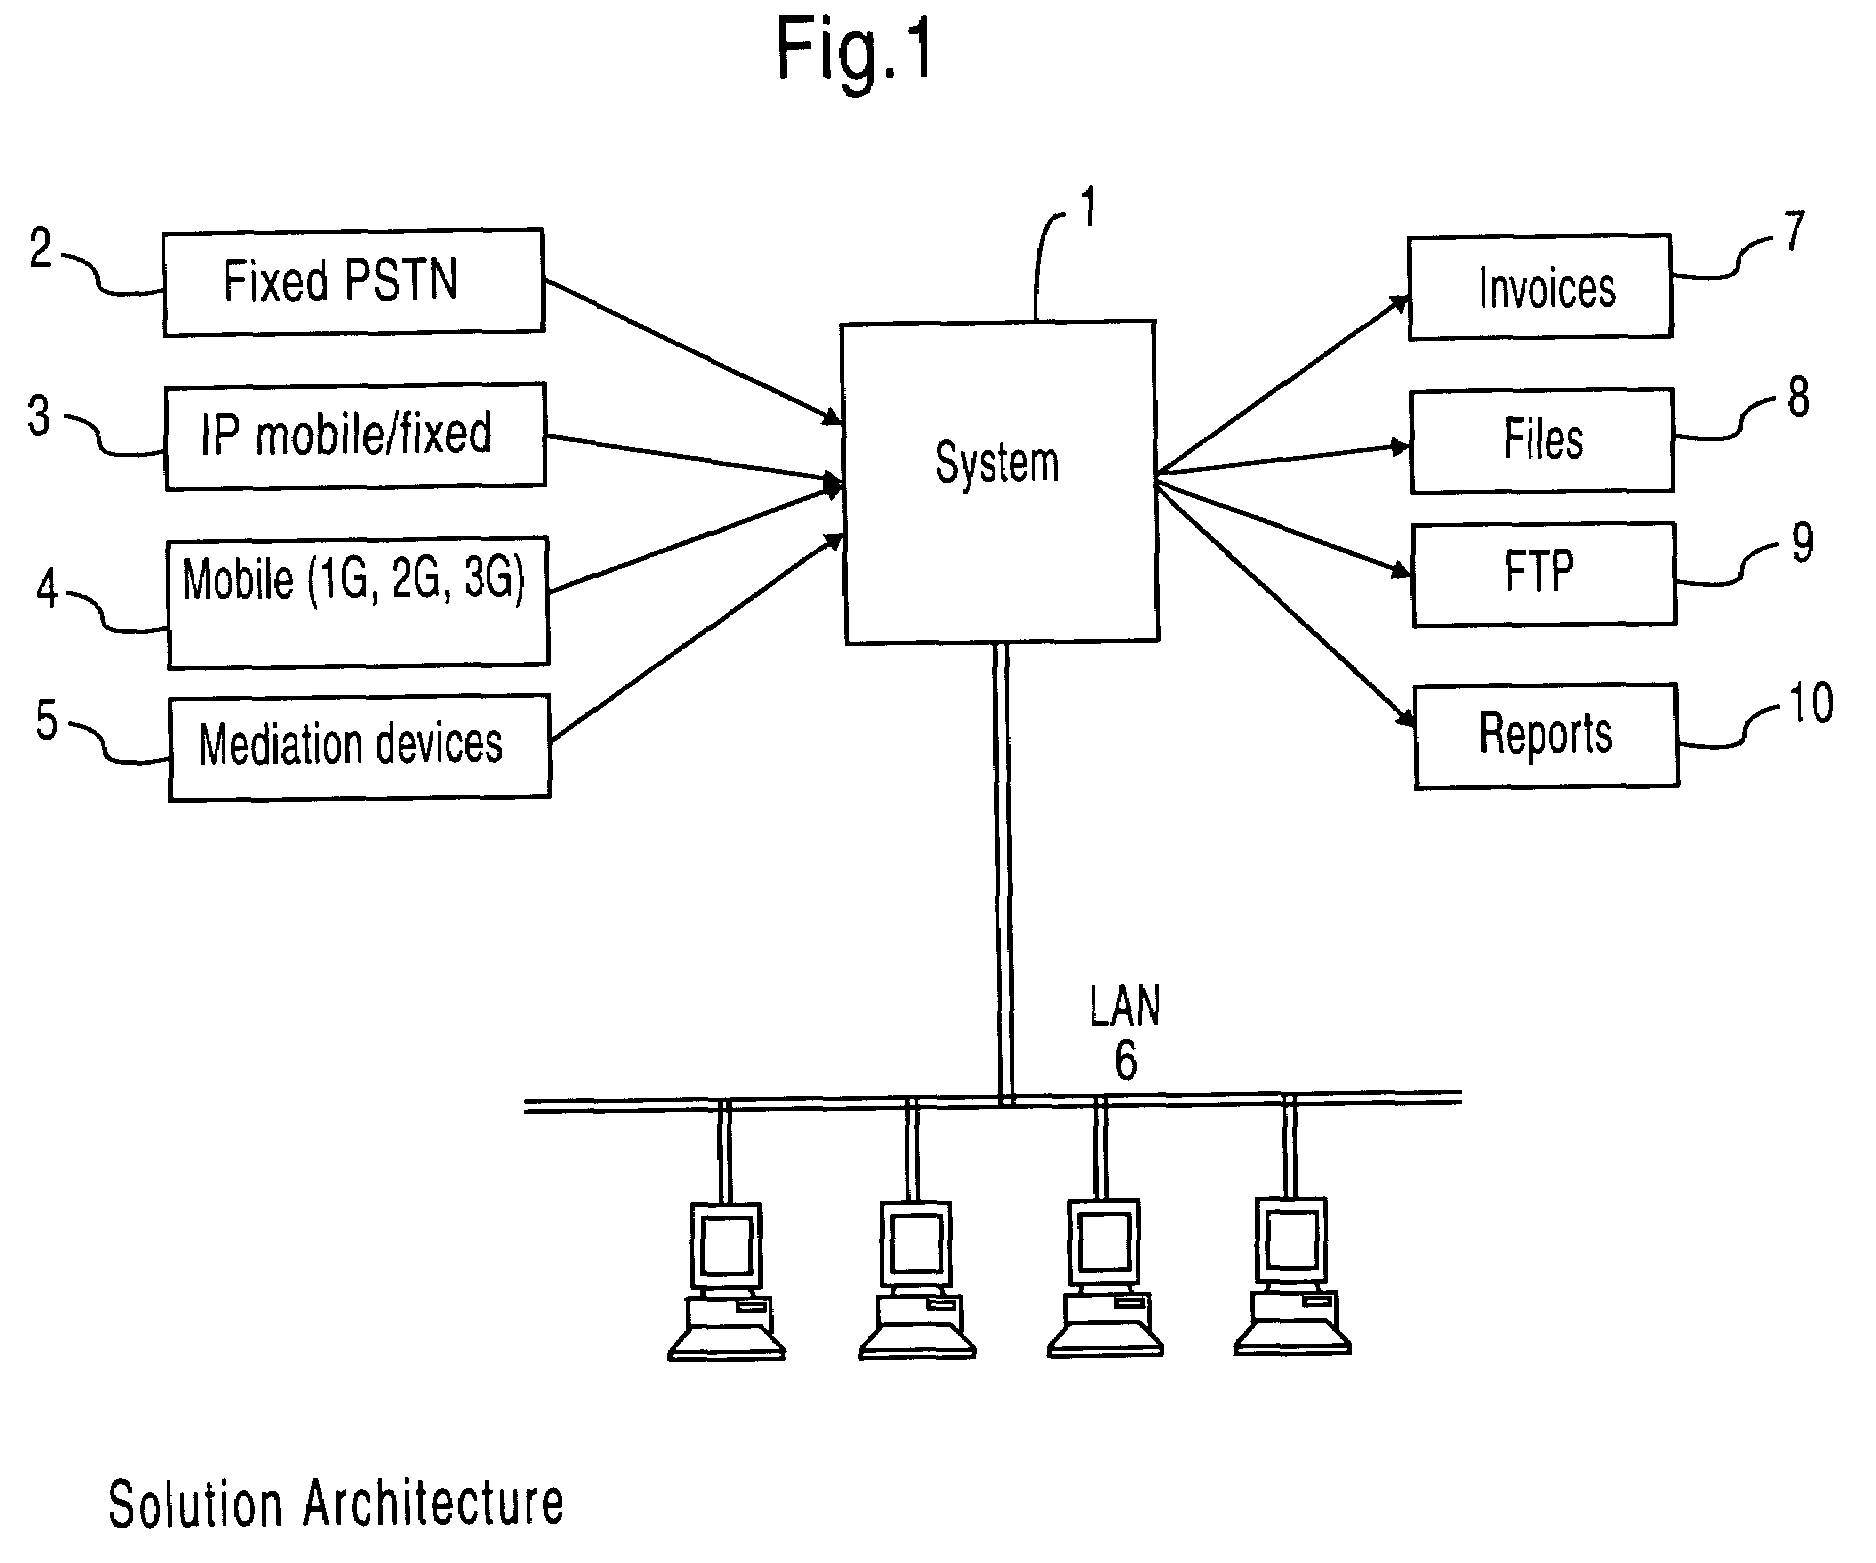 Real-time interconnect billing system and method of use